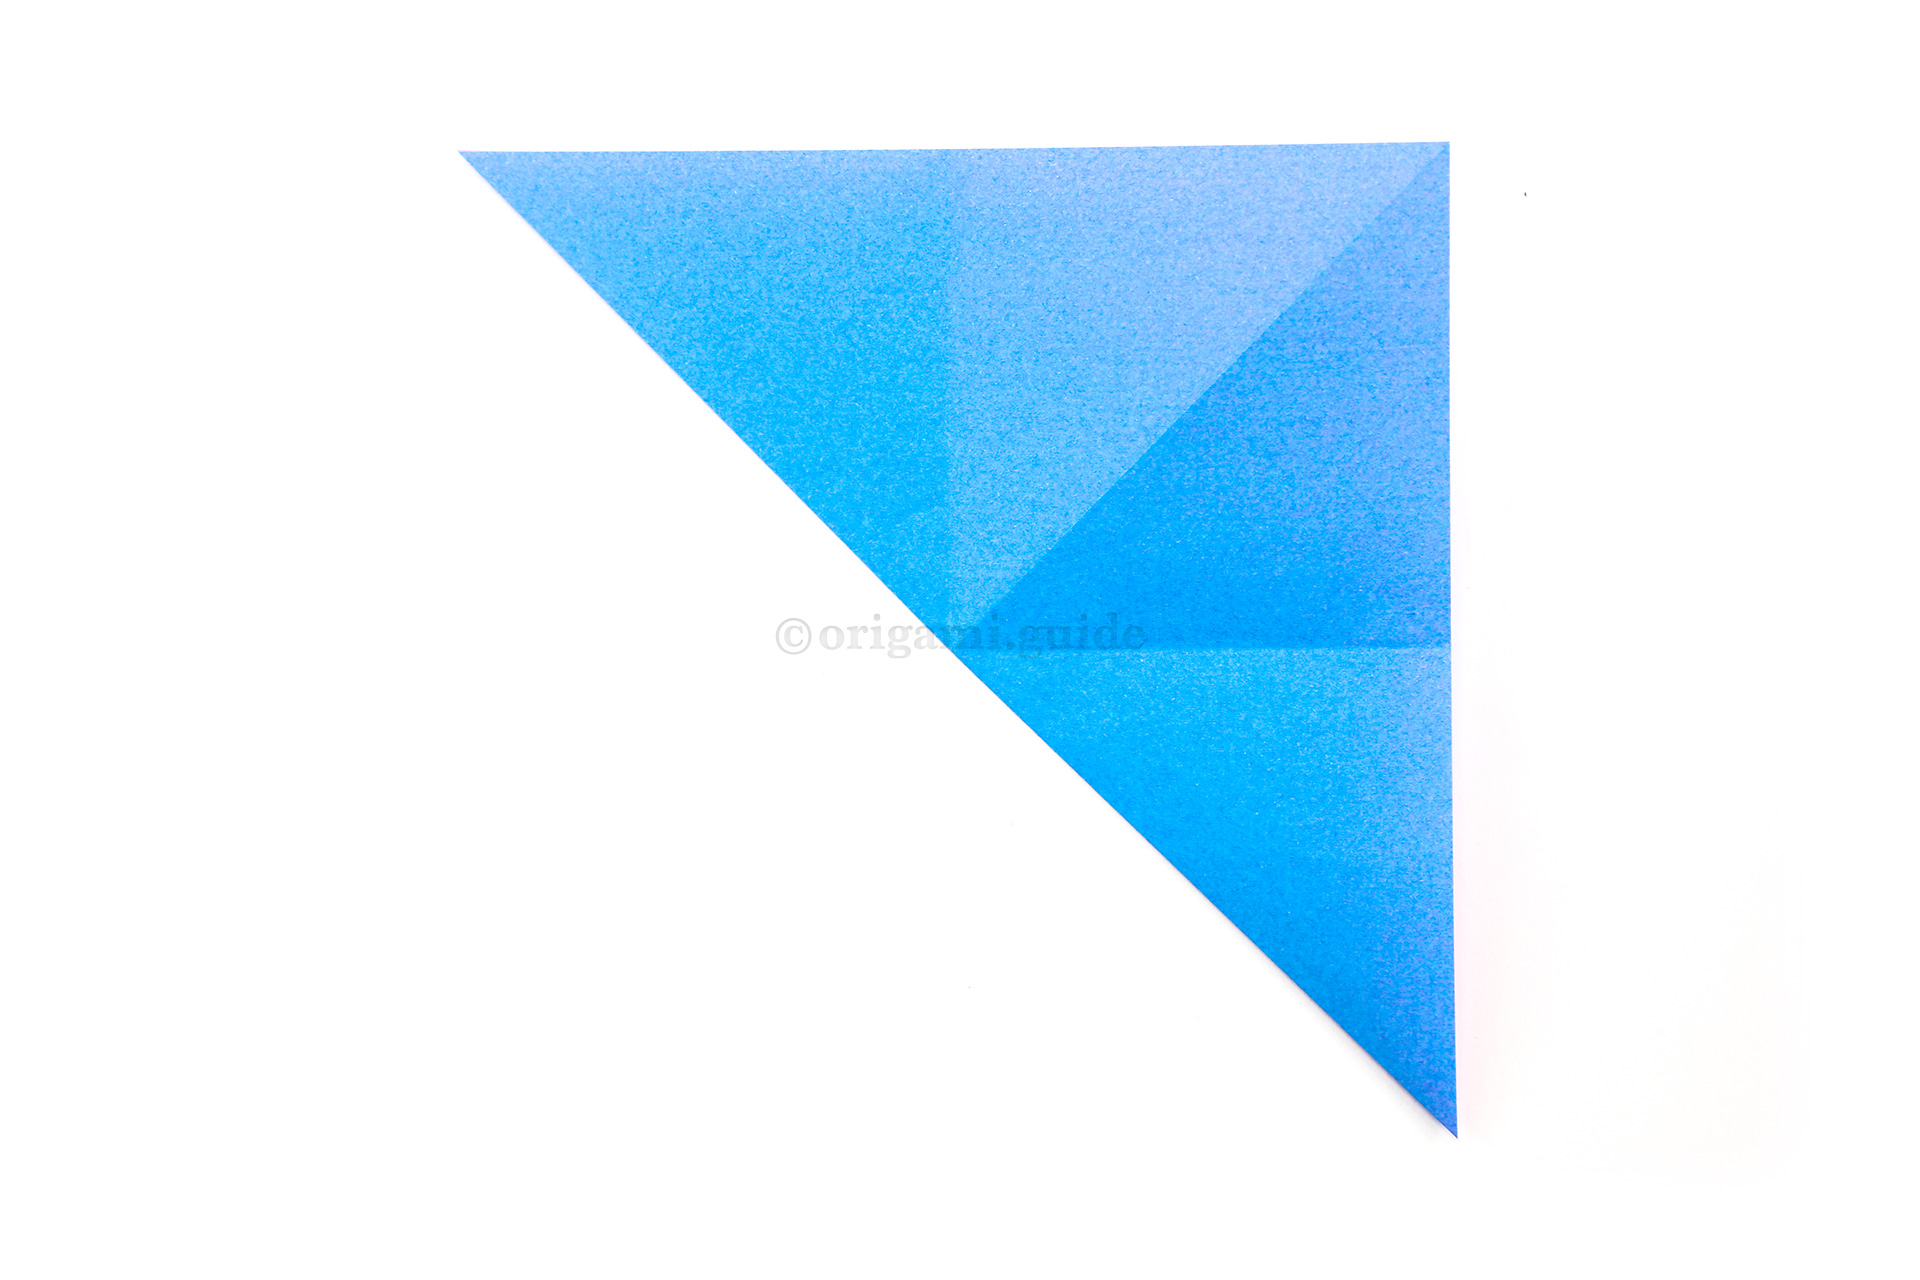 10. Fold the bottom left corner diagonally up to the top right corner.